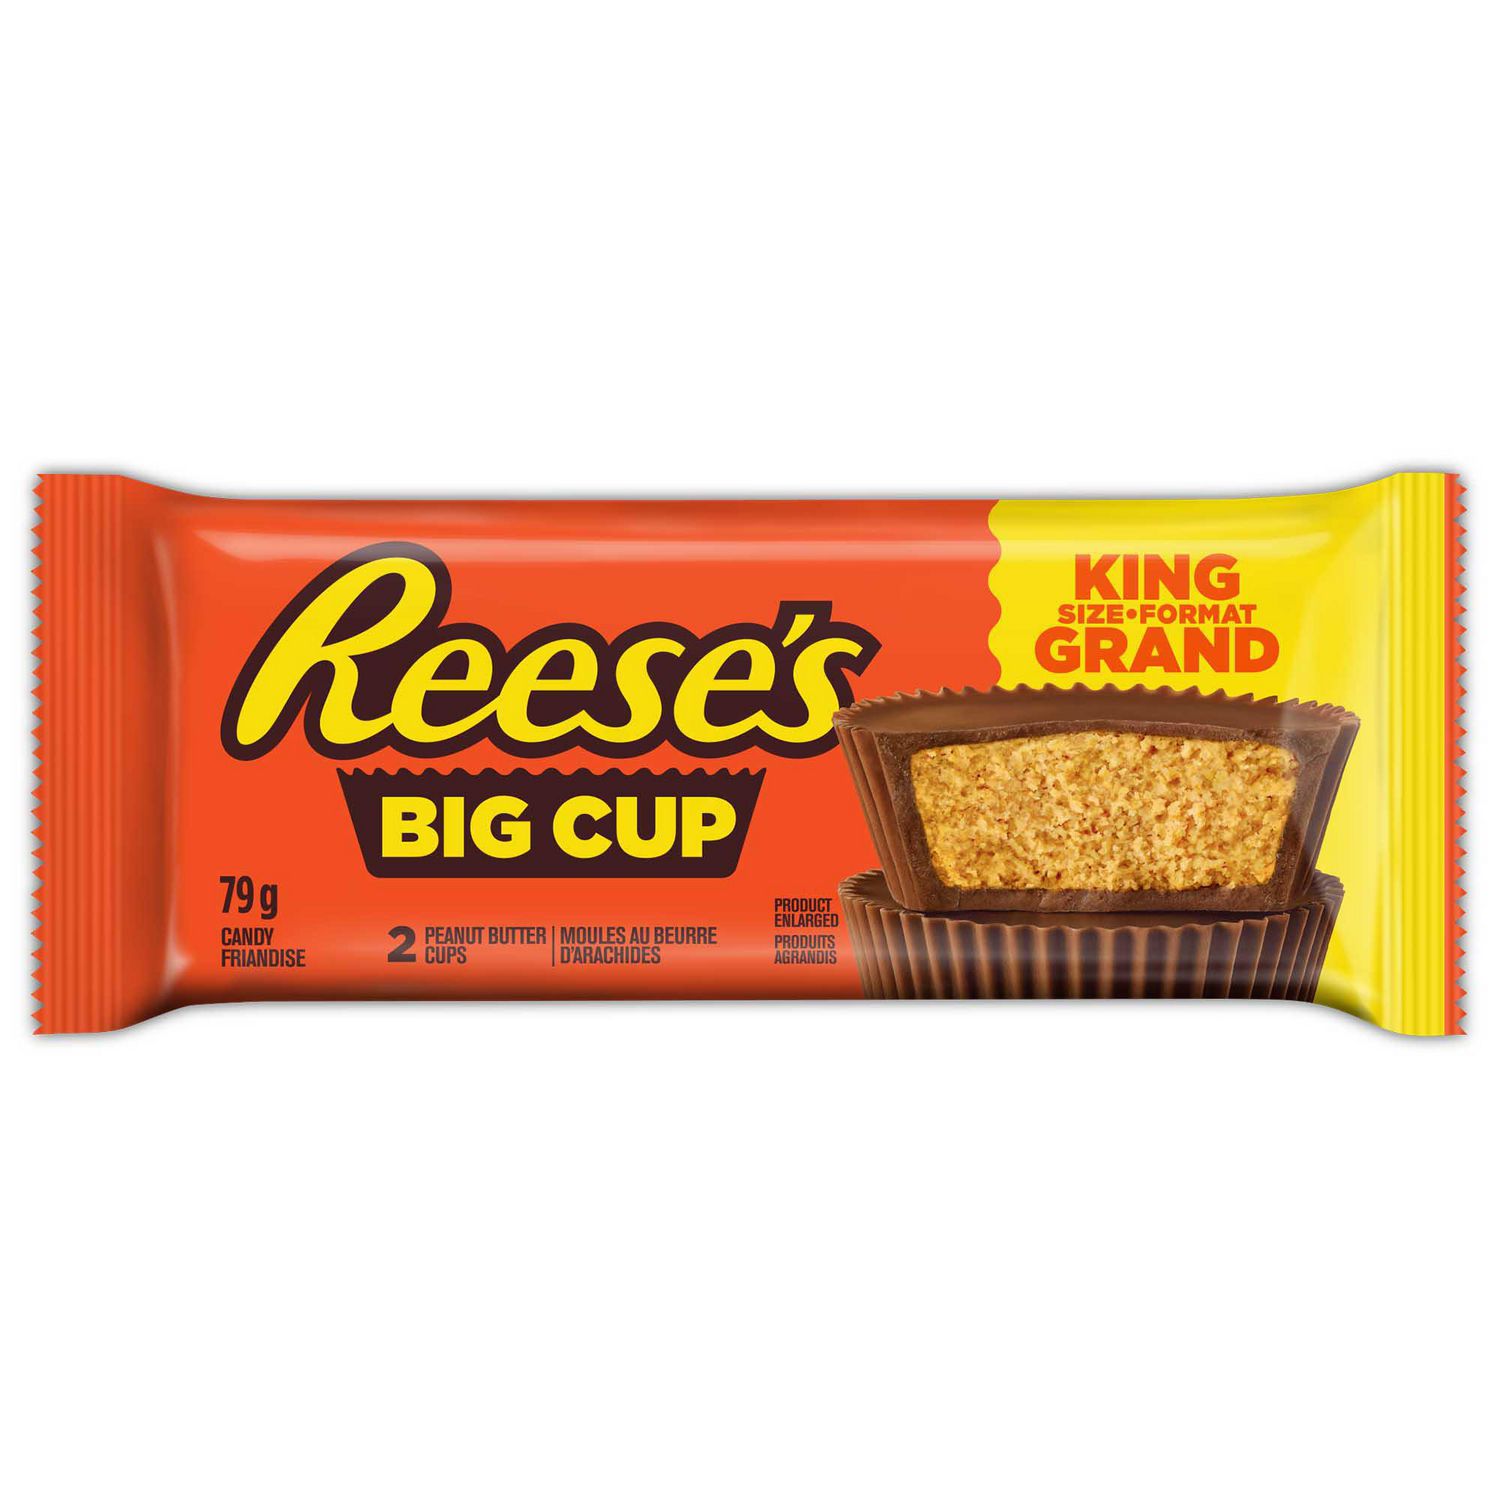 REESE Big Cup PEANUT BUTTER CUPS Candy, King Size Walmart Canada